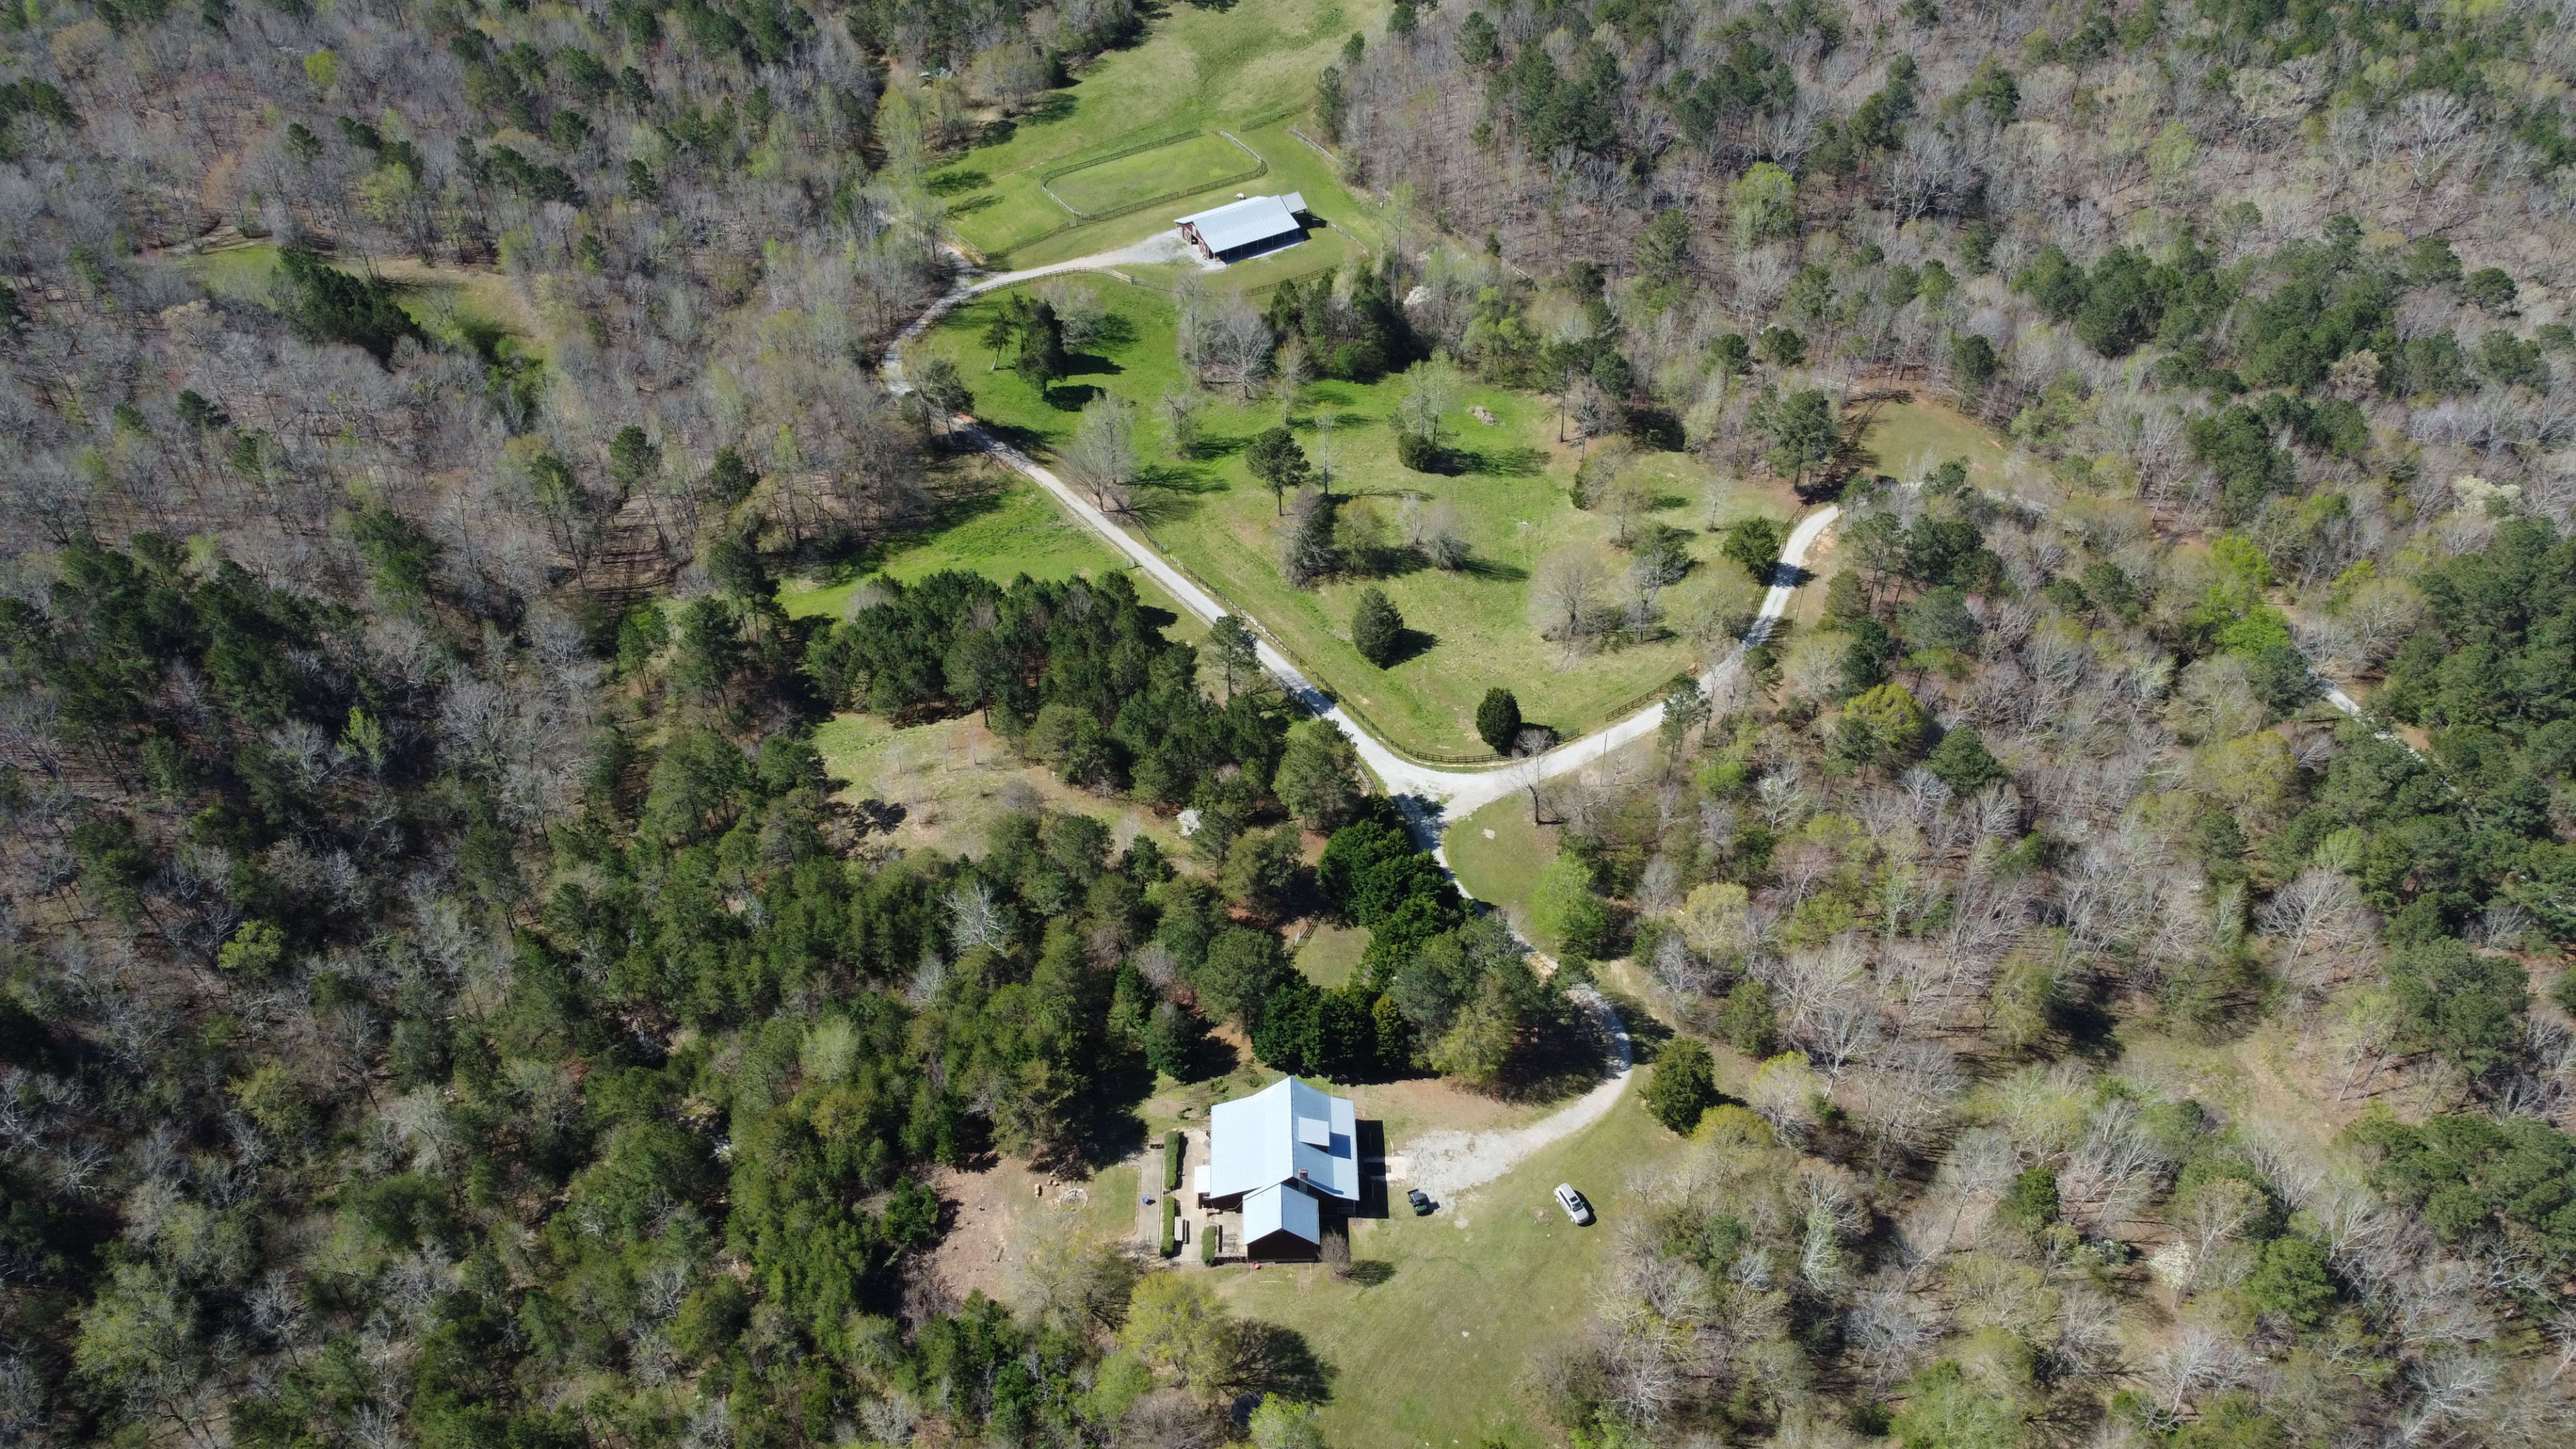 Overhead view of the welcome center and barn